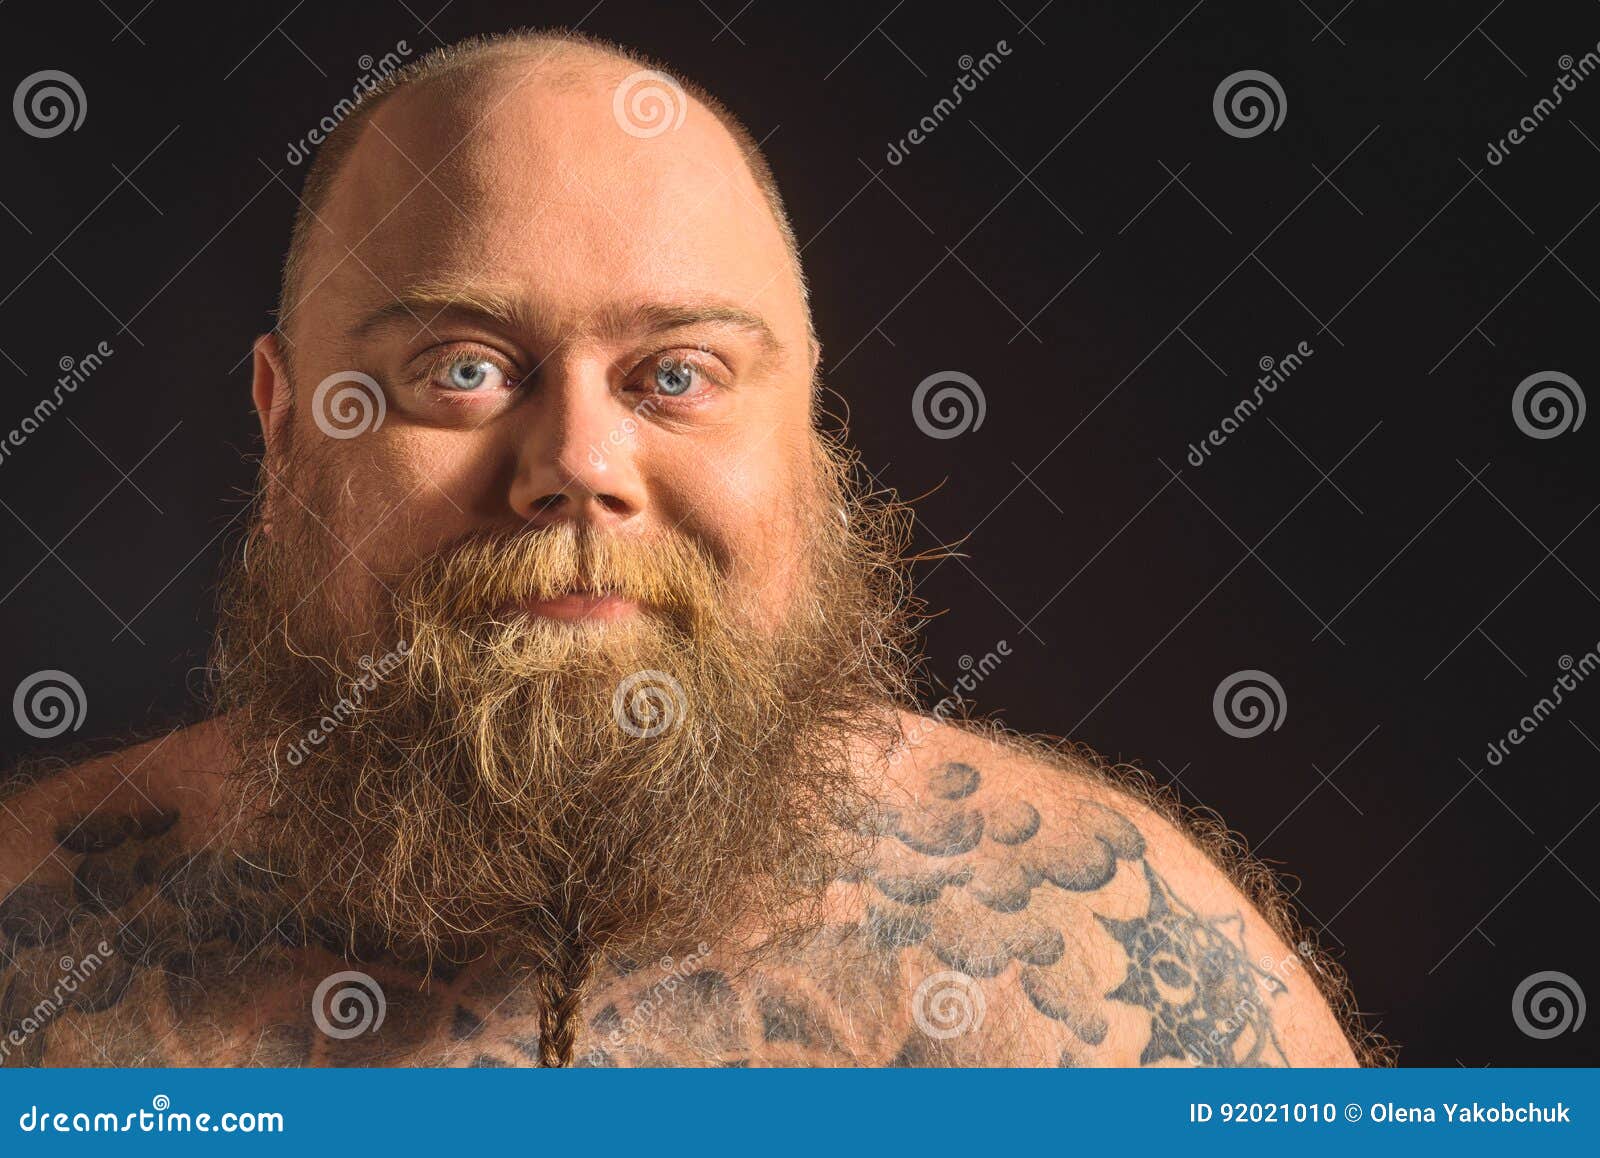 Fat Middle Aged Nudes - Joyful Thick Naked Guy With Cute Smile Stock Photo - Image ...